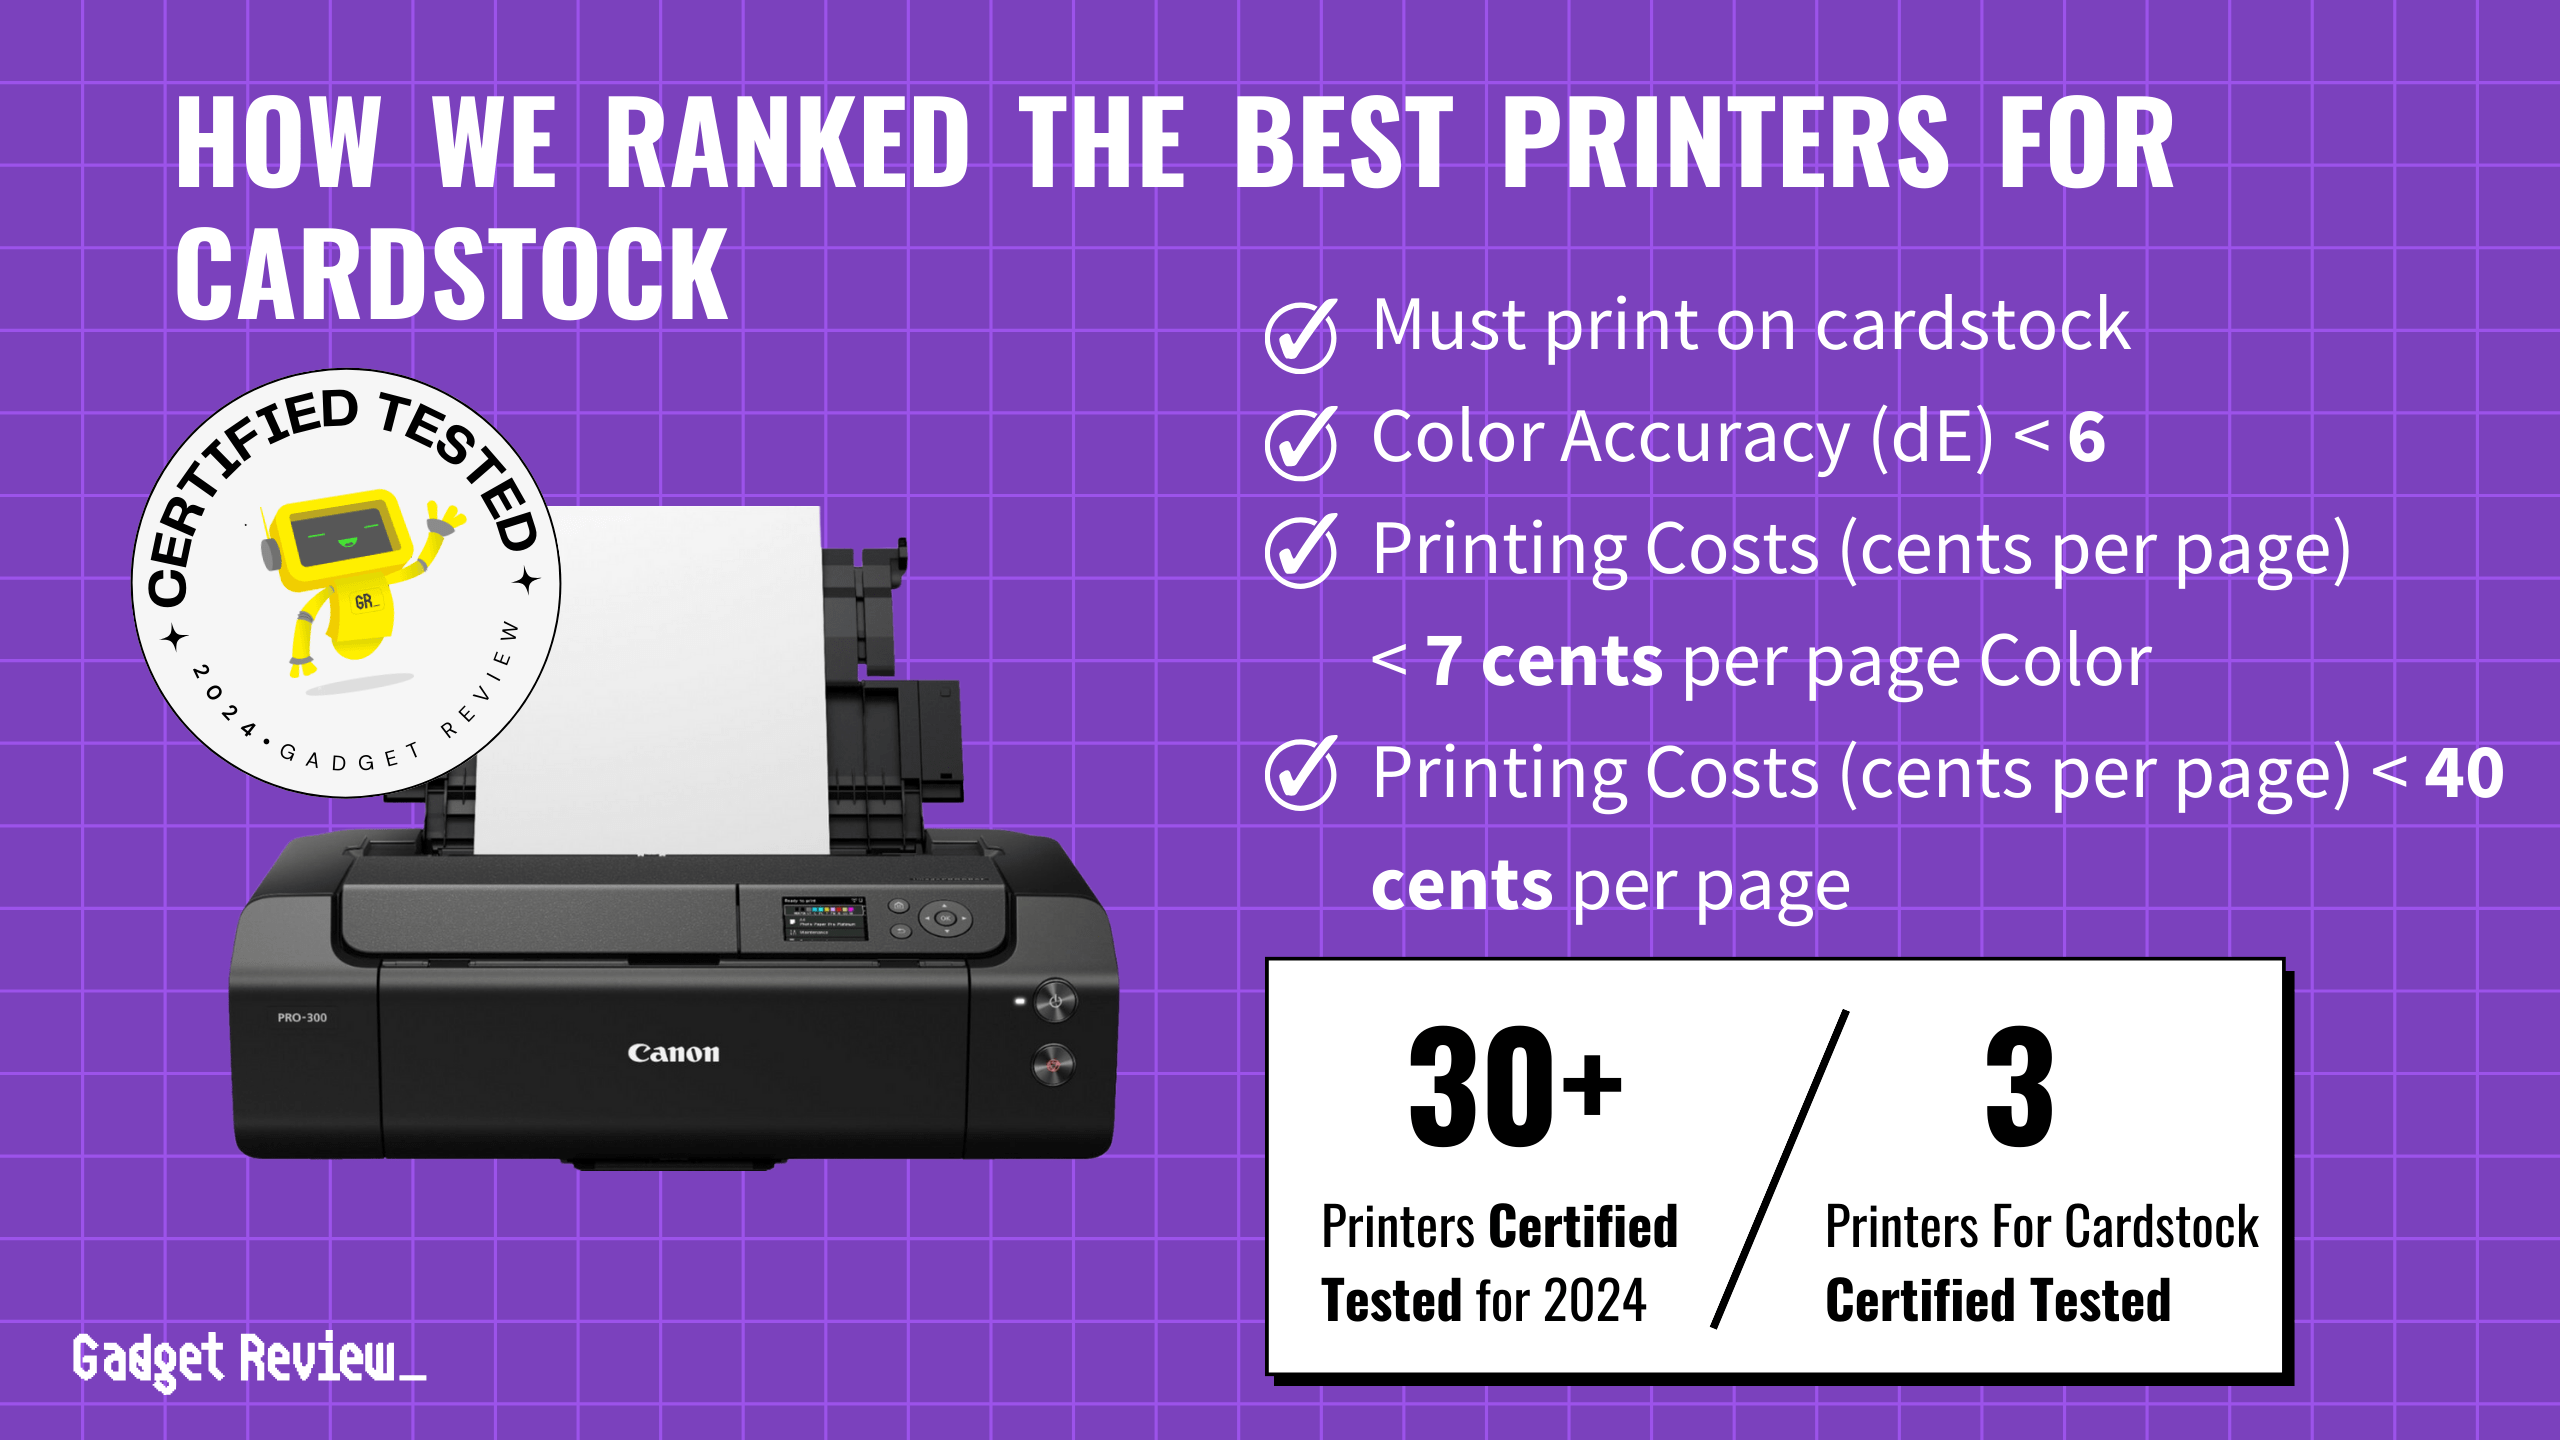 best printer cardstock guide that shows the top best printer model